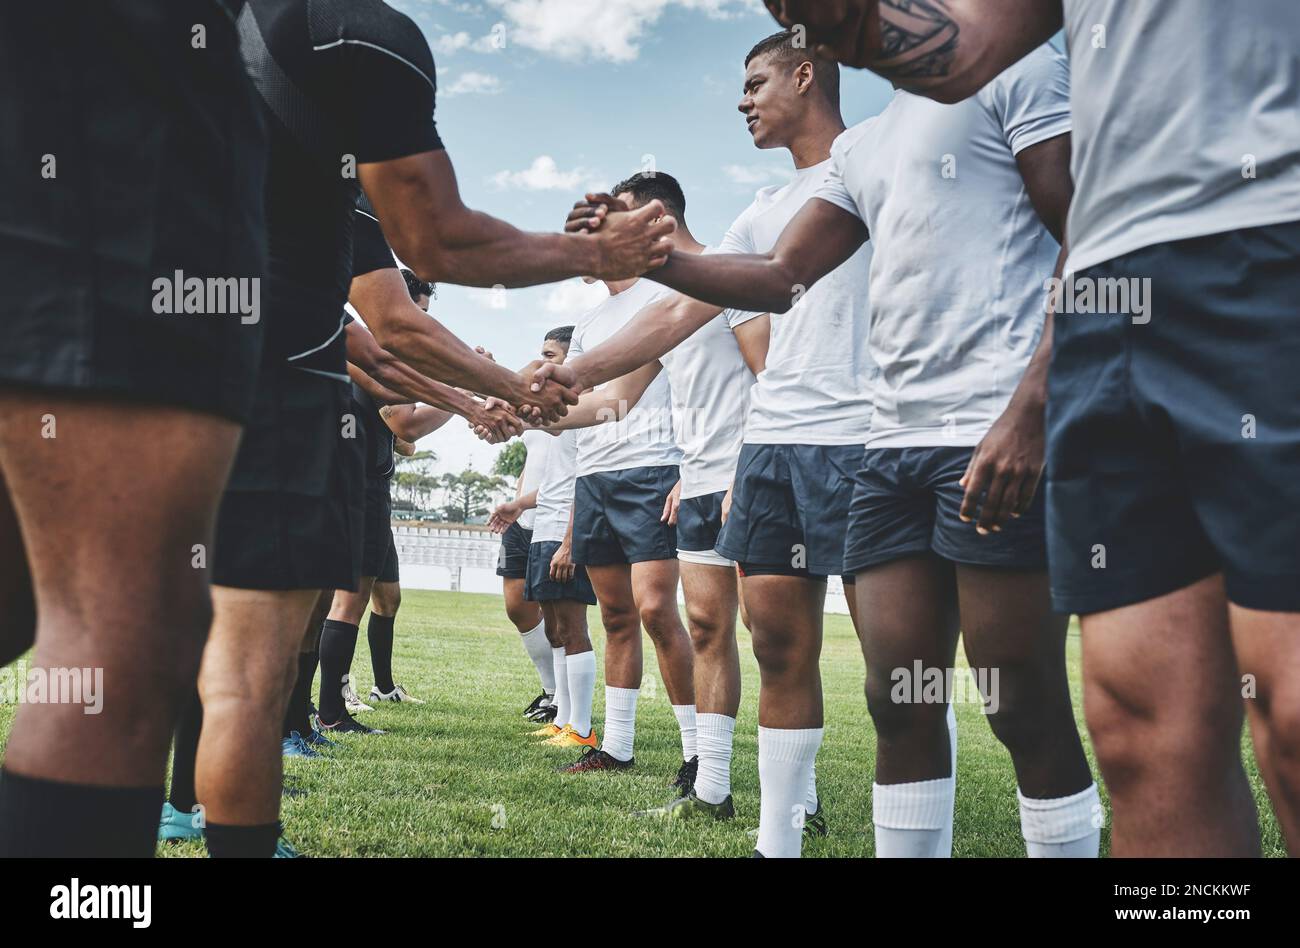 Well played. a group of young rugby players shaking each others hands to congratulate in playing a good game outside on a filed. Stock Photo